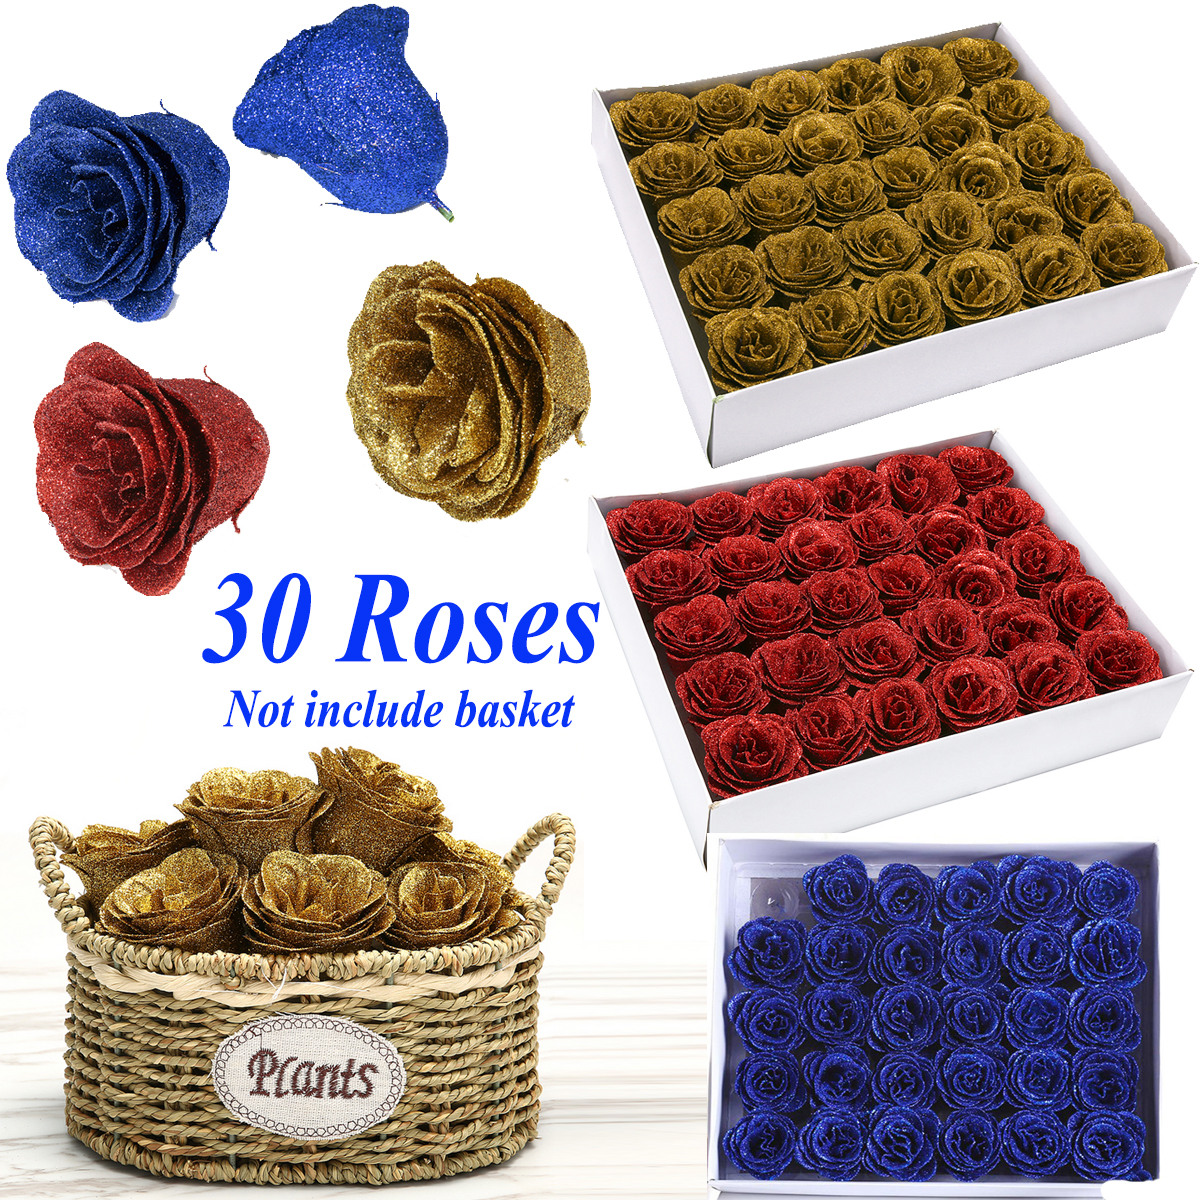 30PCS-Artificial-Rose-Flower-Crystal-Gold-Powder-Valentines-Day-Party-Gift-Decorations-1600349-1